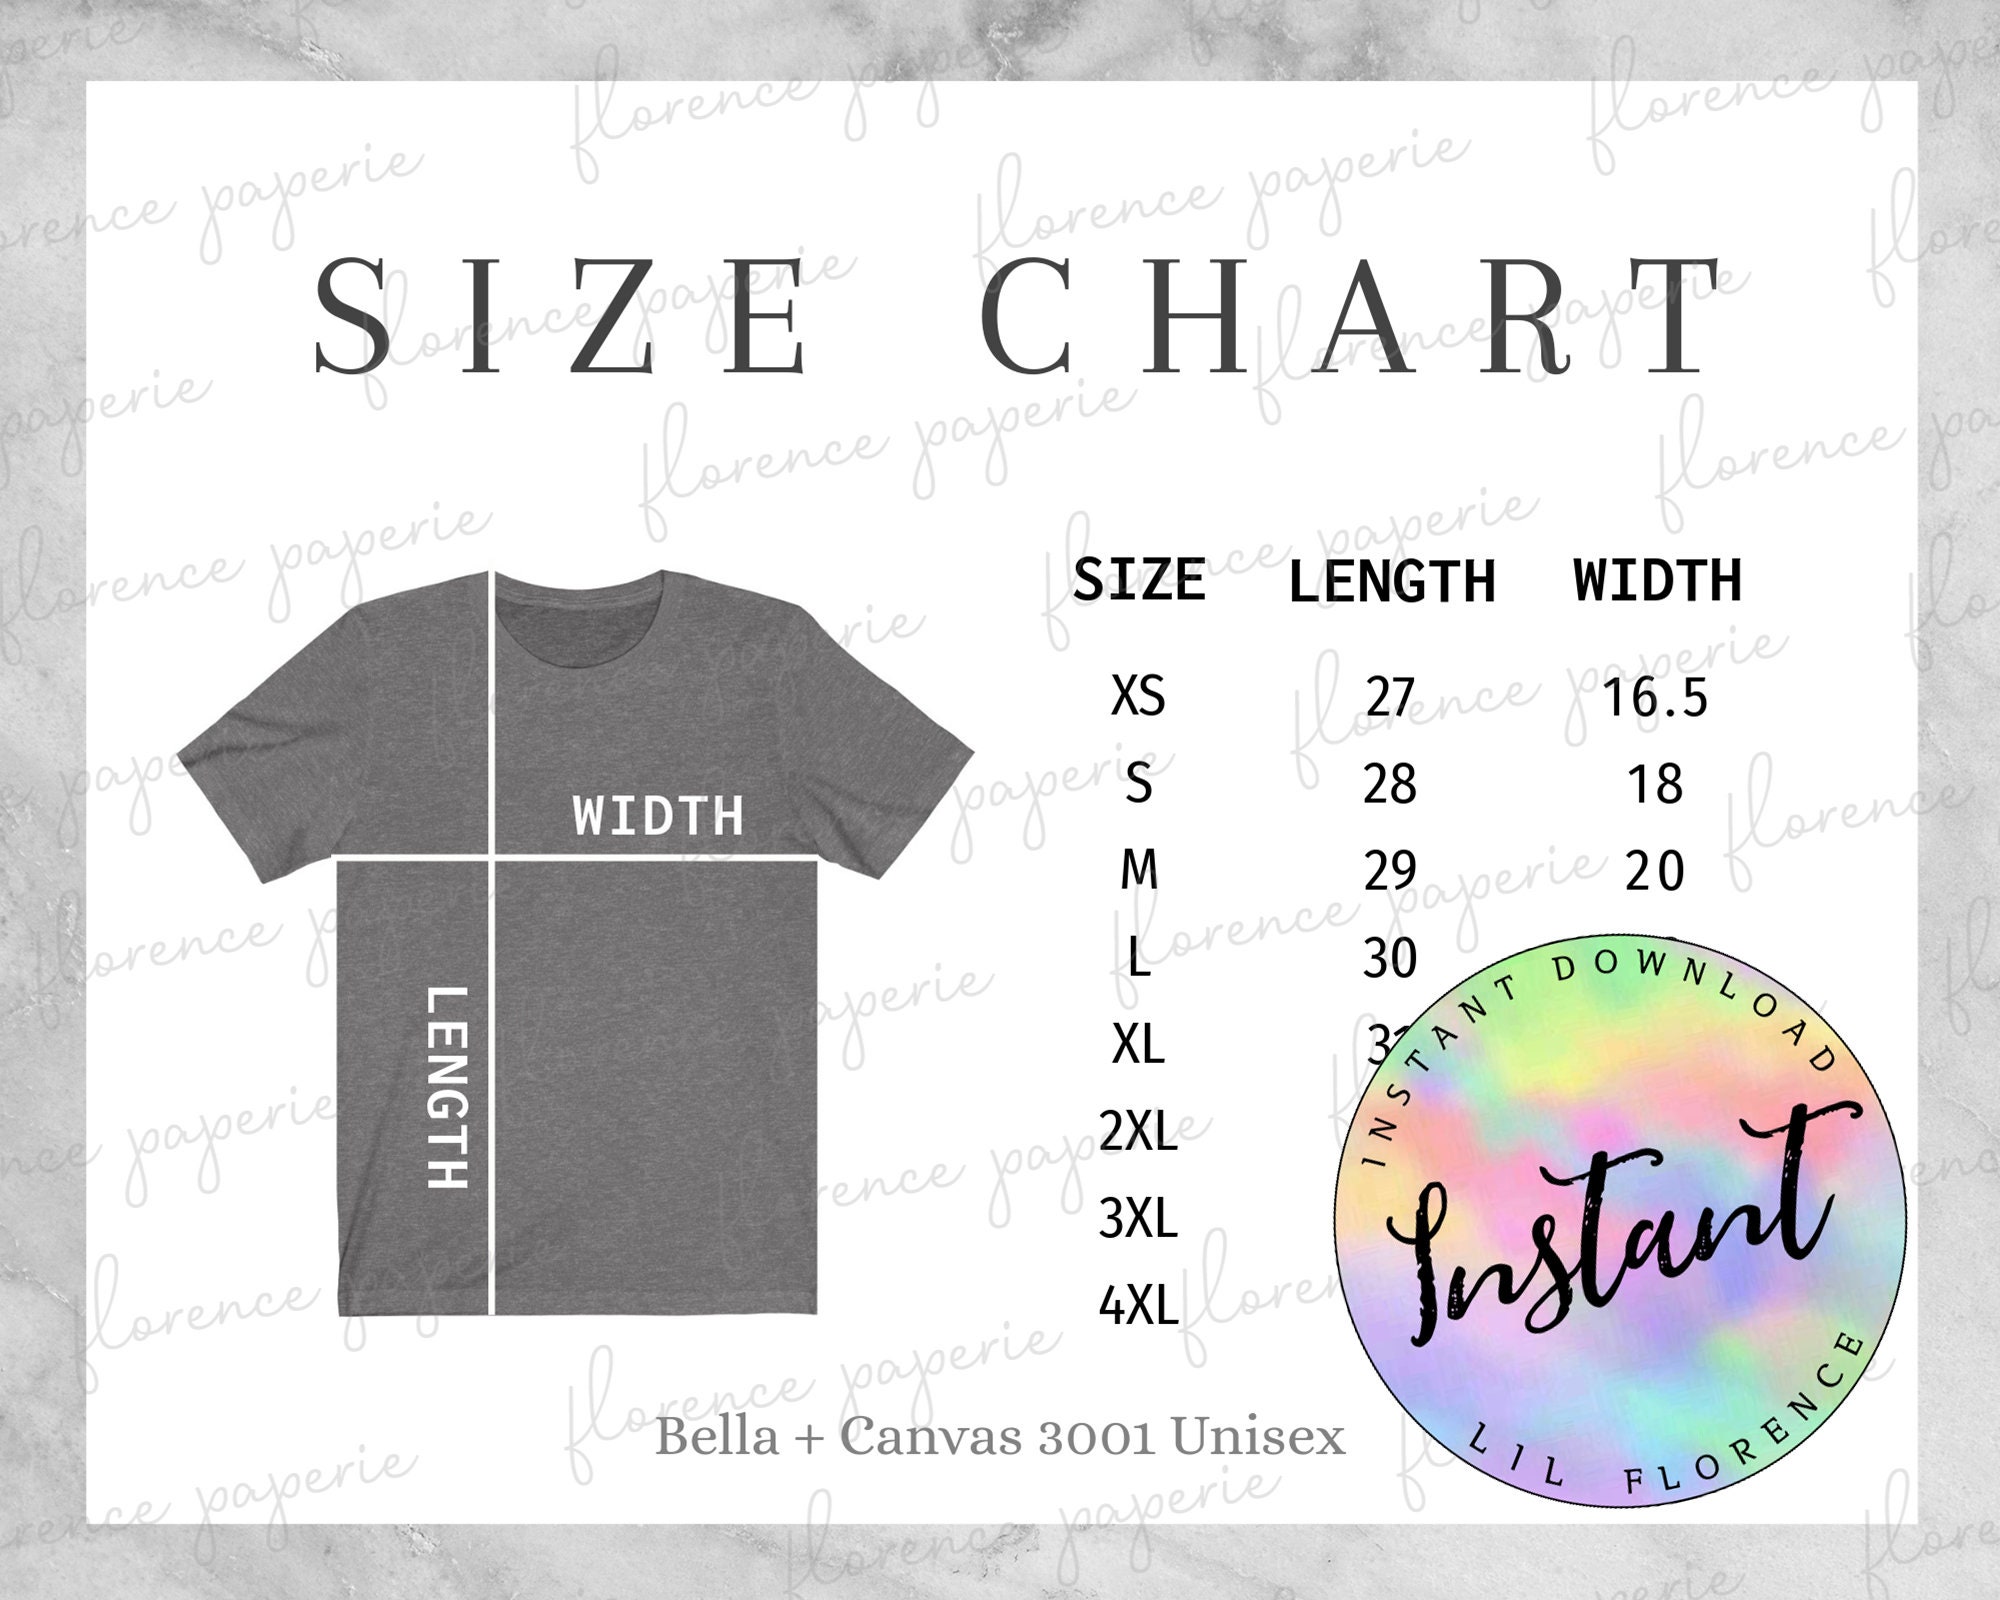 Bella 3001 Sizing Flat Lay Tee Size Chart Inches Imperial System Unisex ...